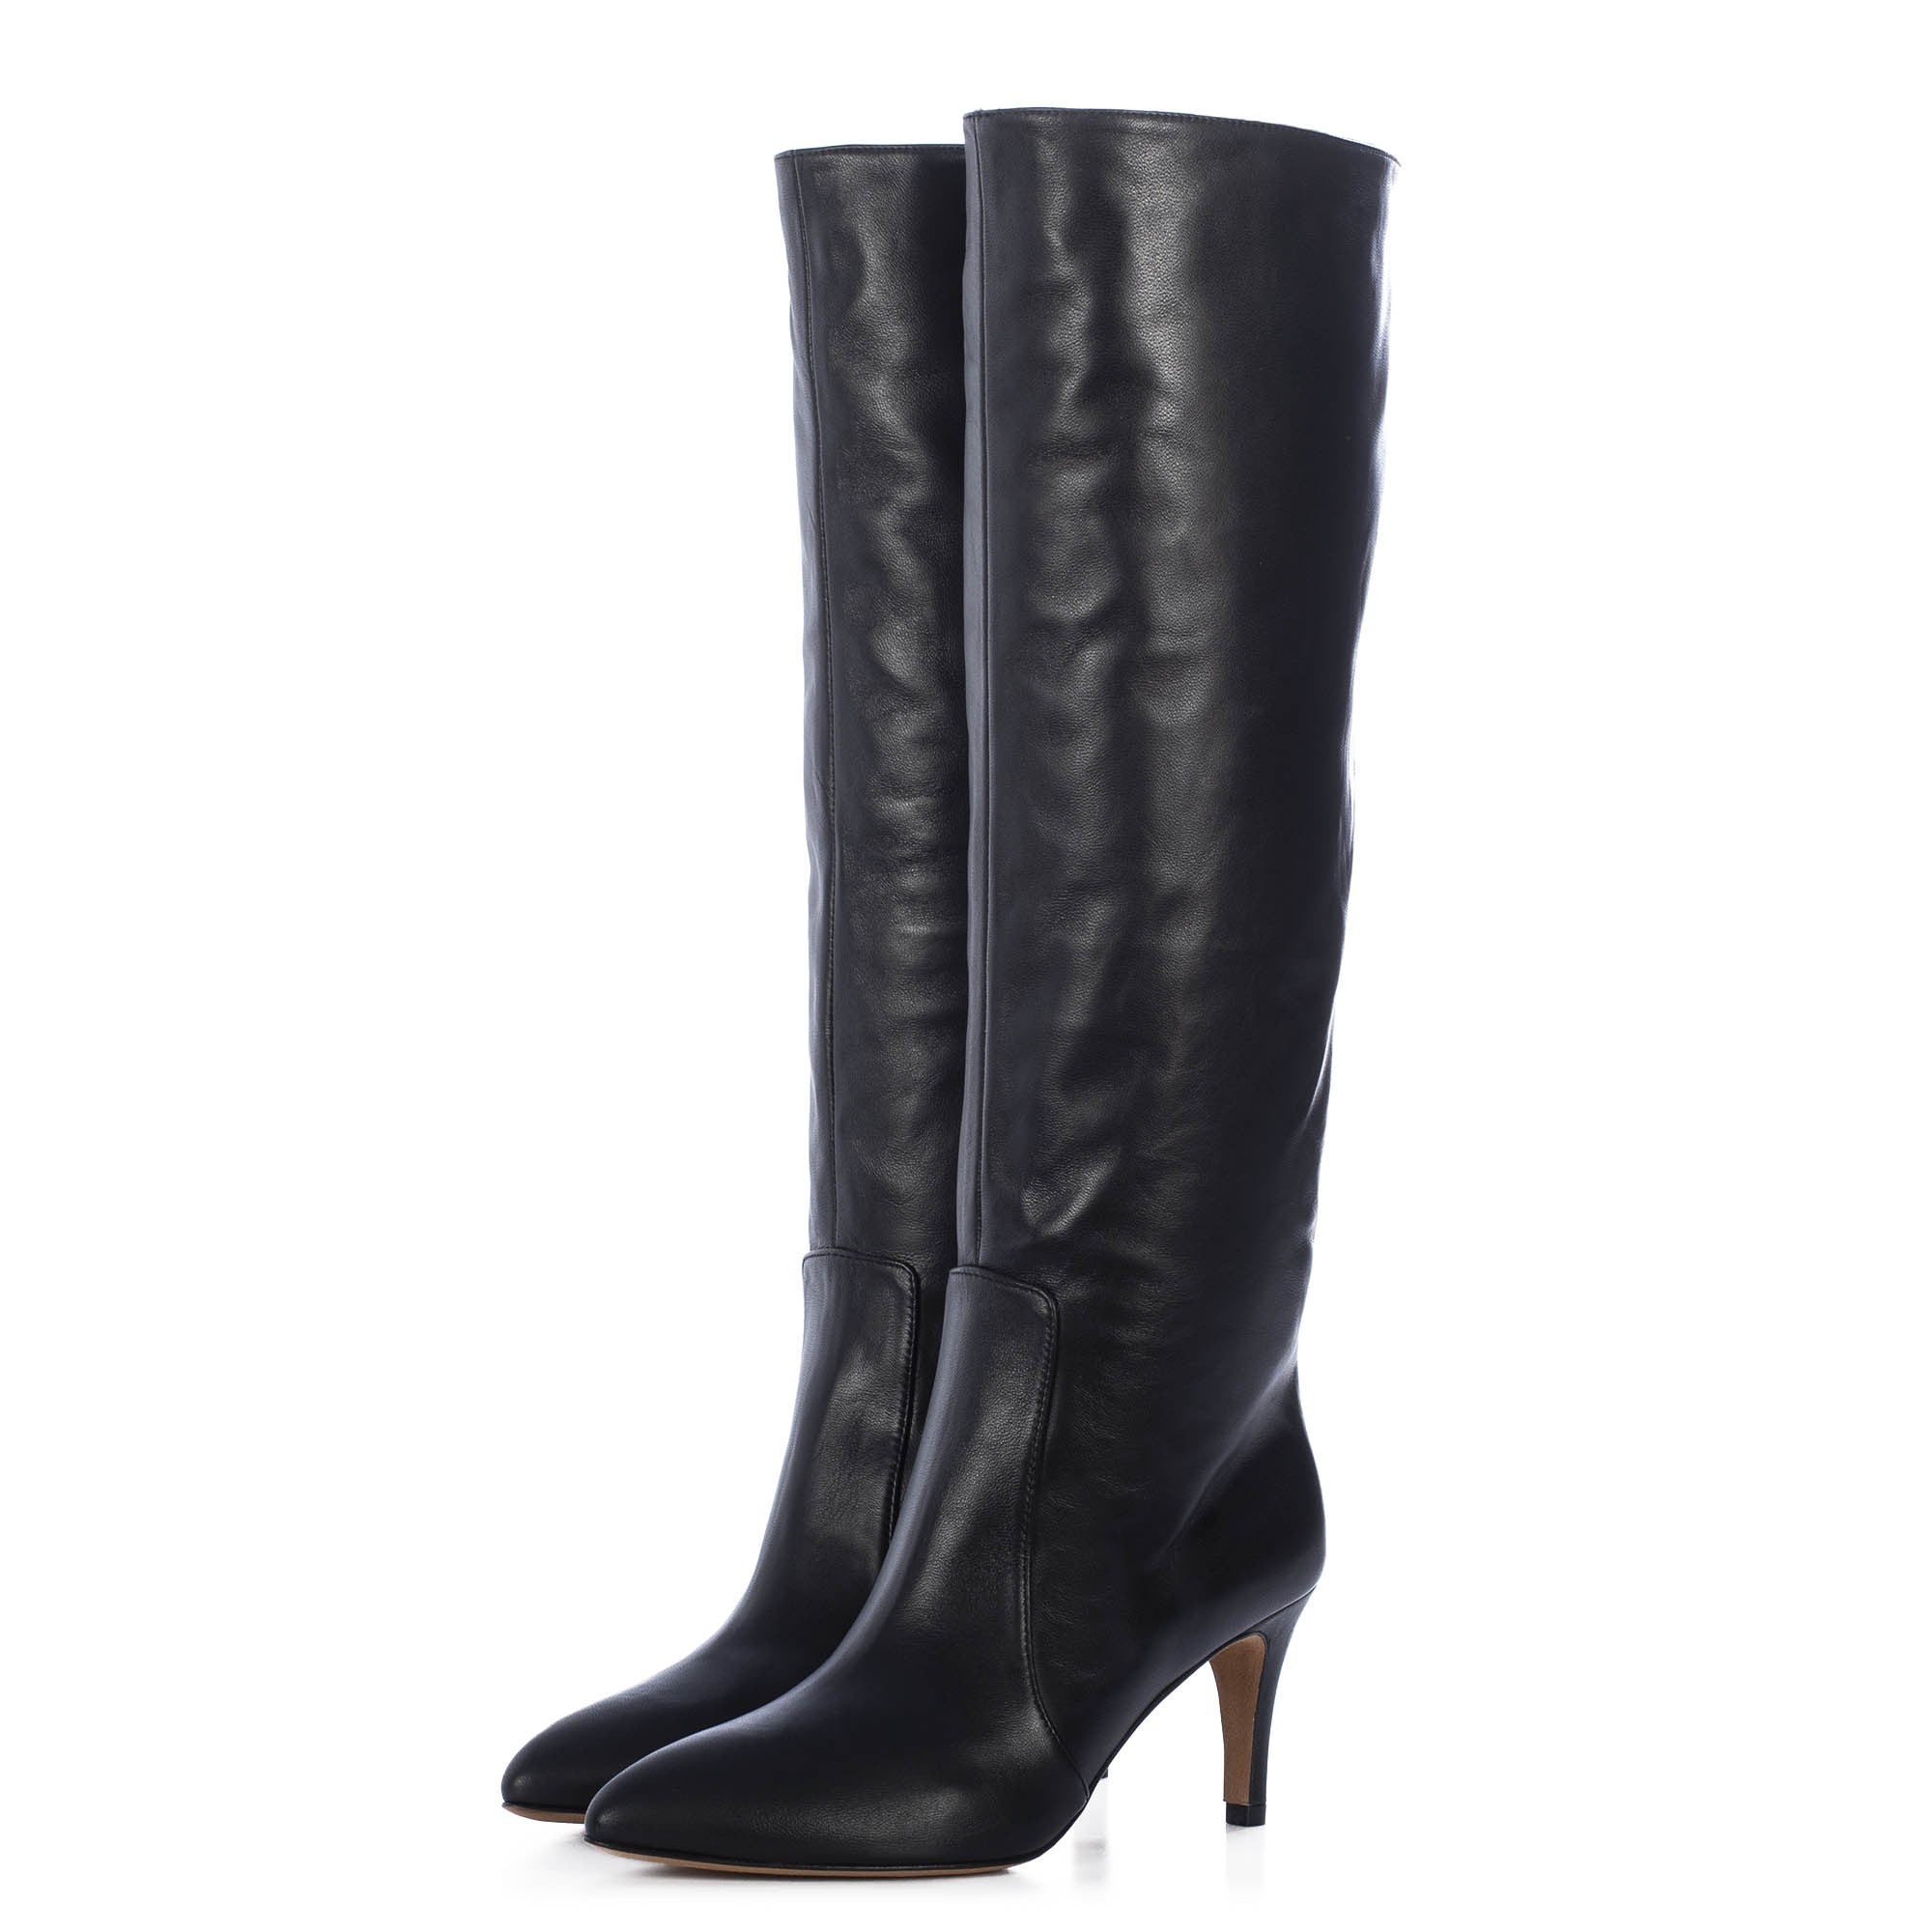 TORAL BLACK LEATHER TALL BOOTS (6942872600716)